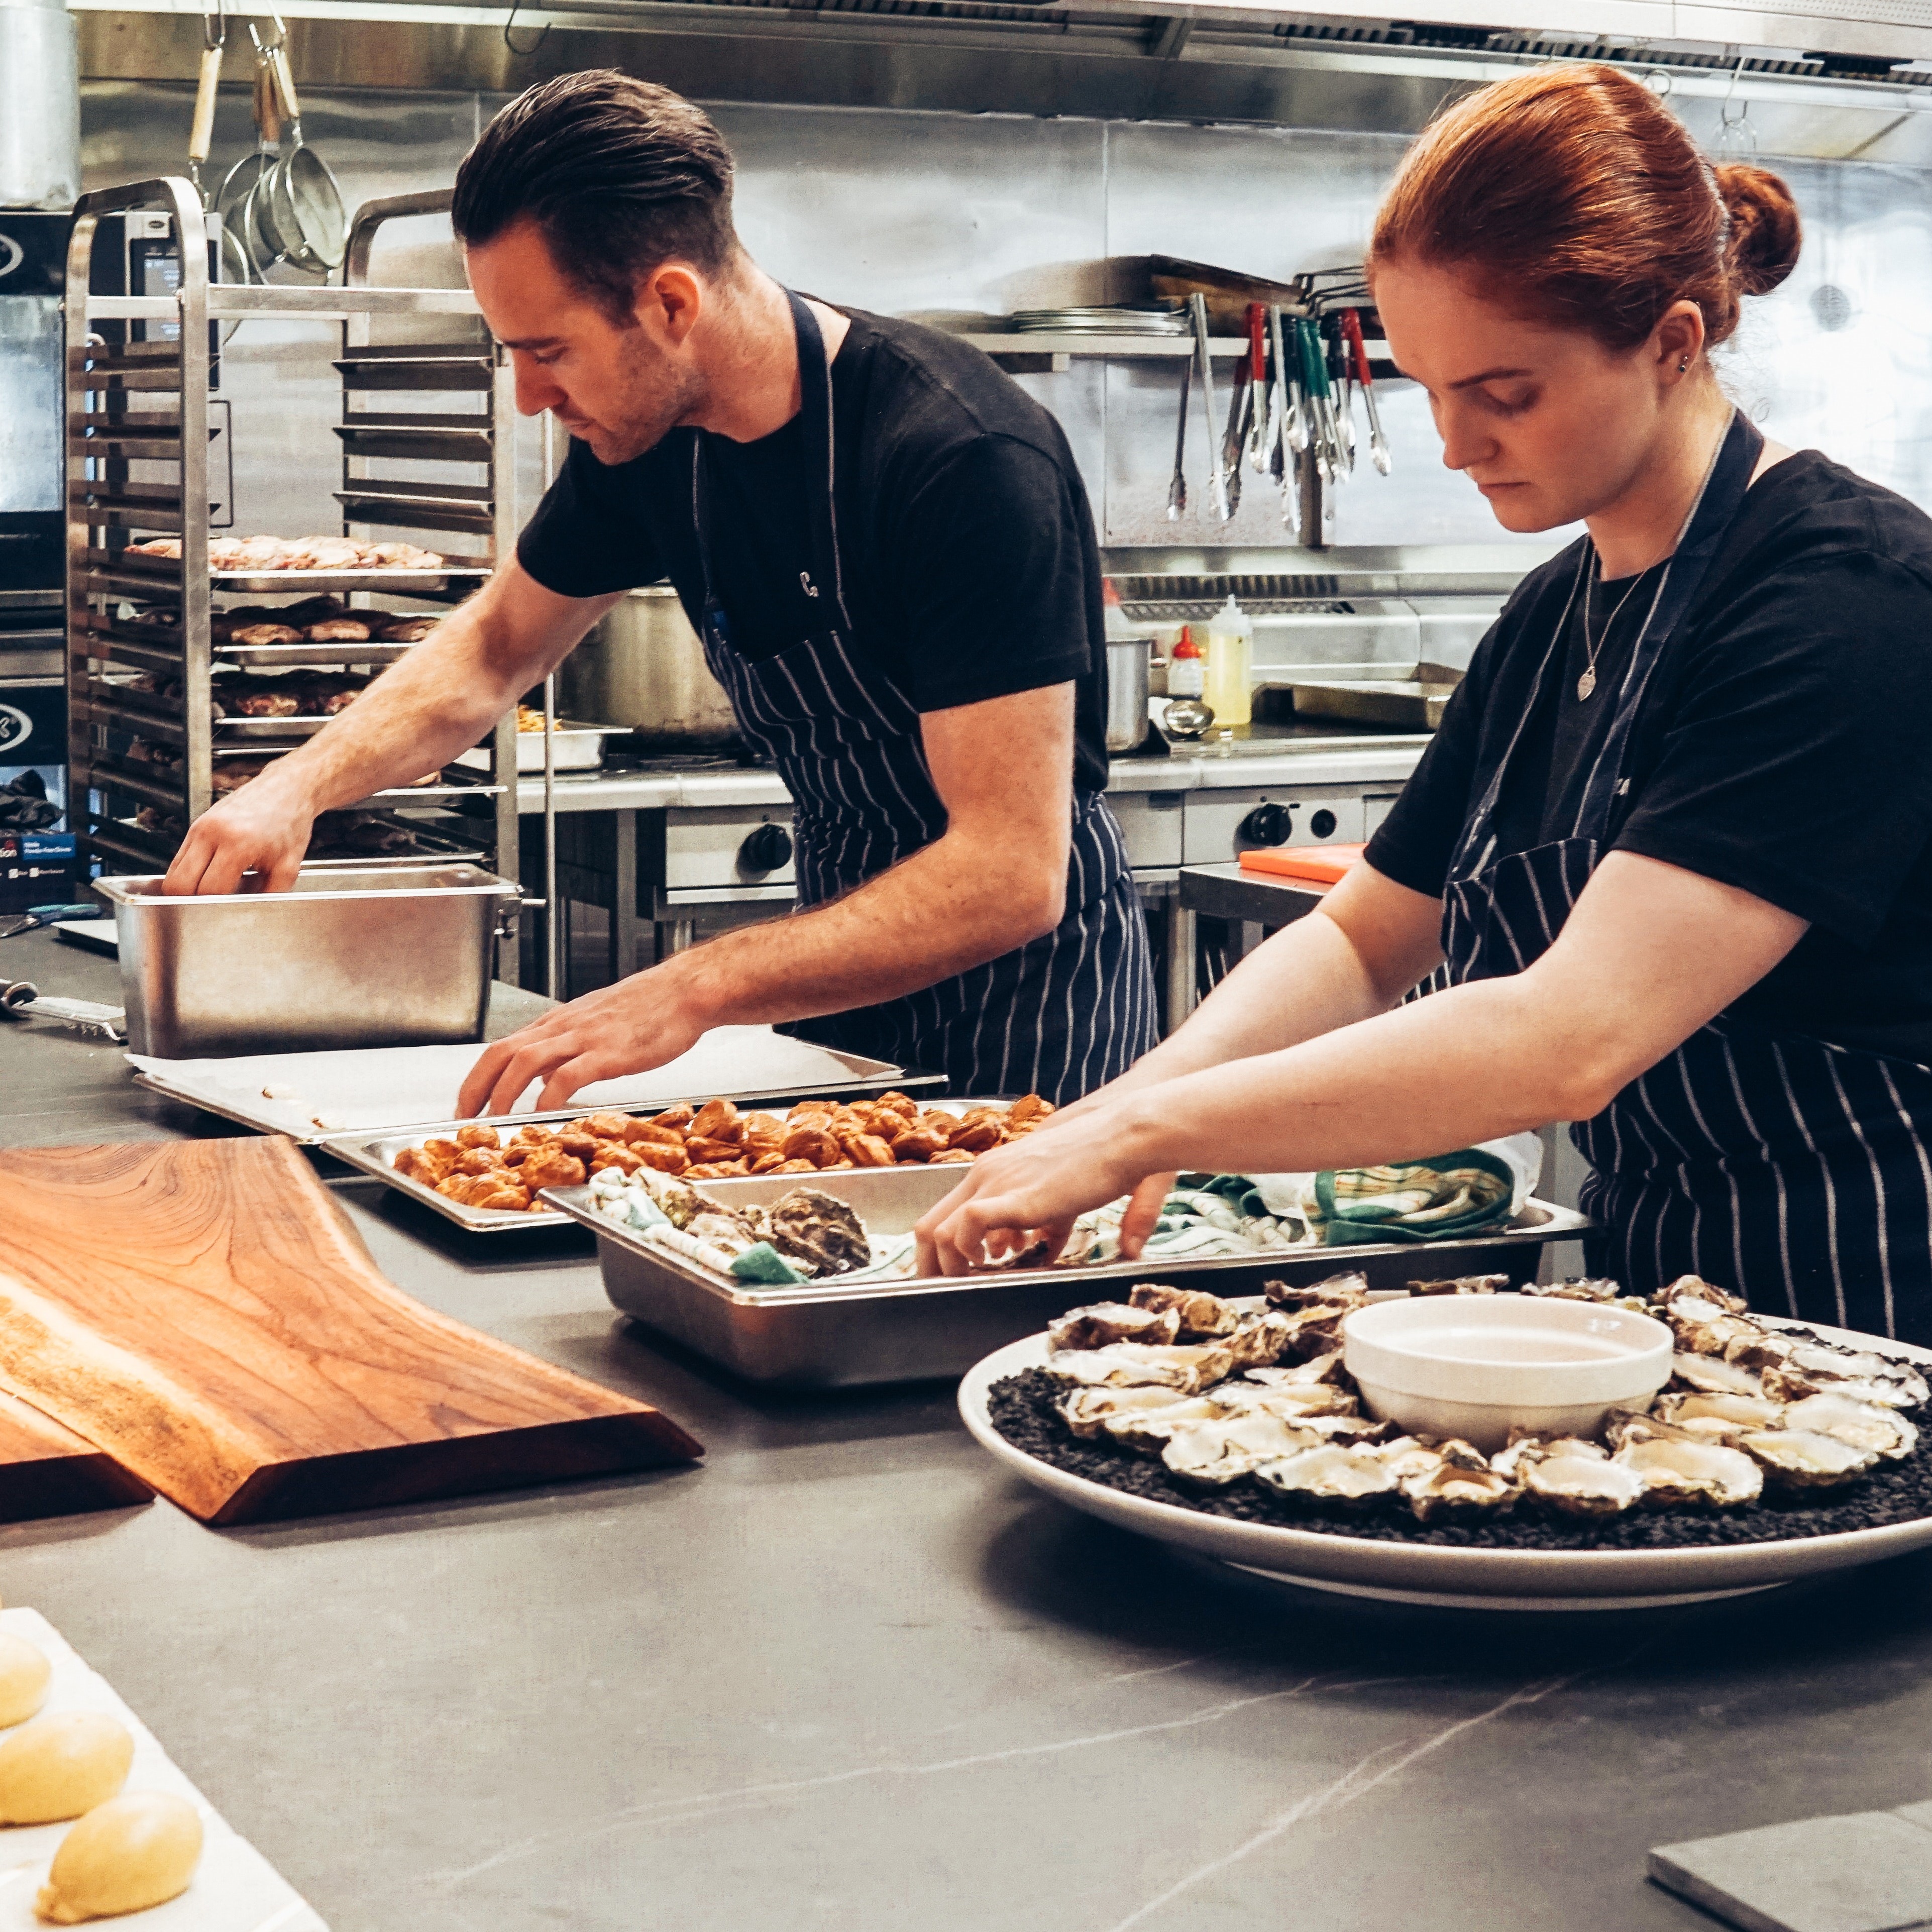 Two caterers prepare platters of food in industrial kitchen